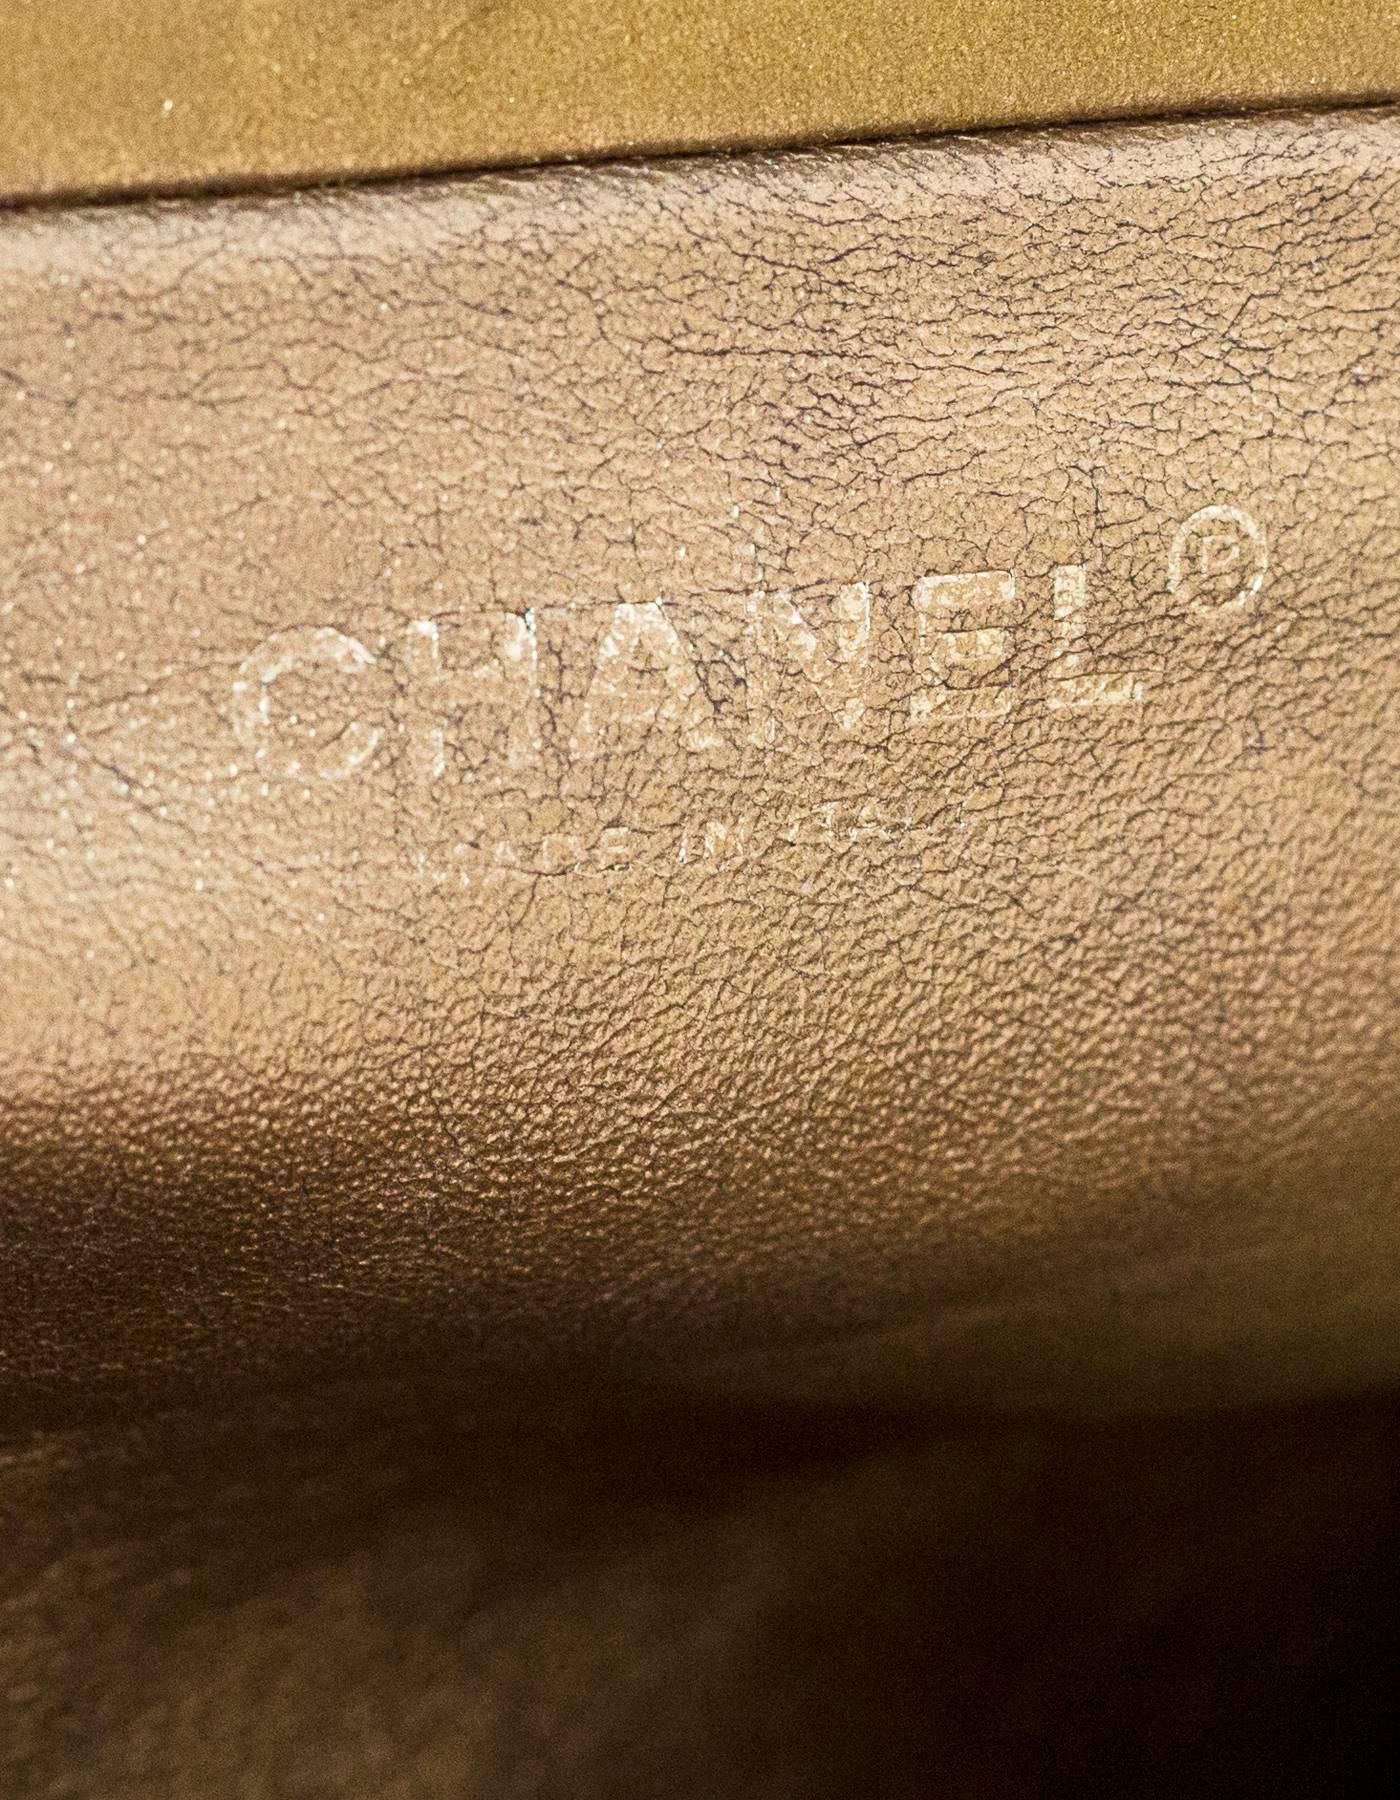 Women's Chanel Gold Crackled Leather Clutch Bag with Box & Dust Bag